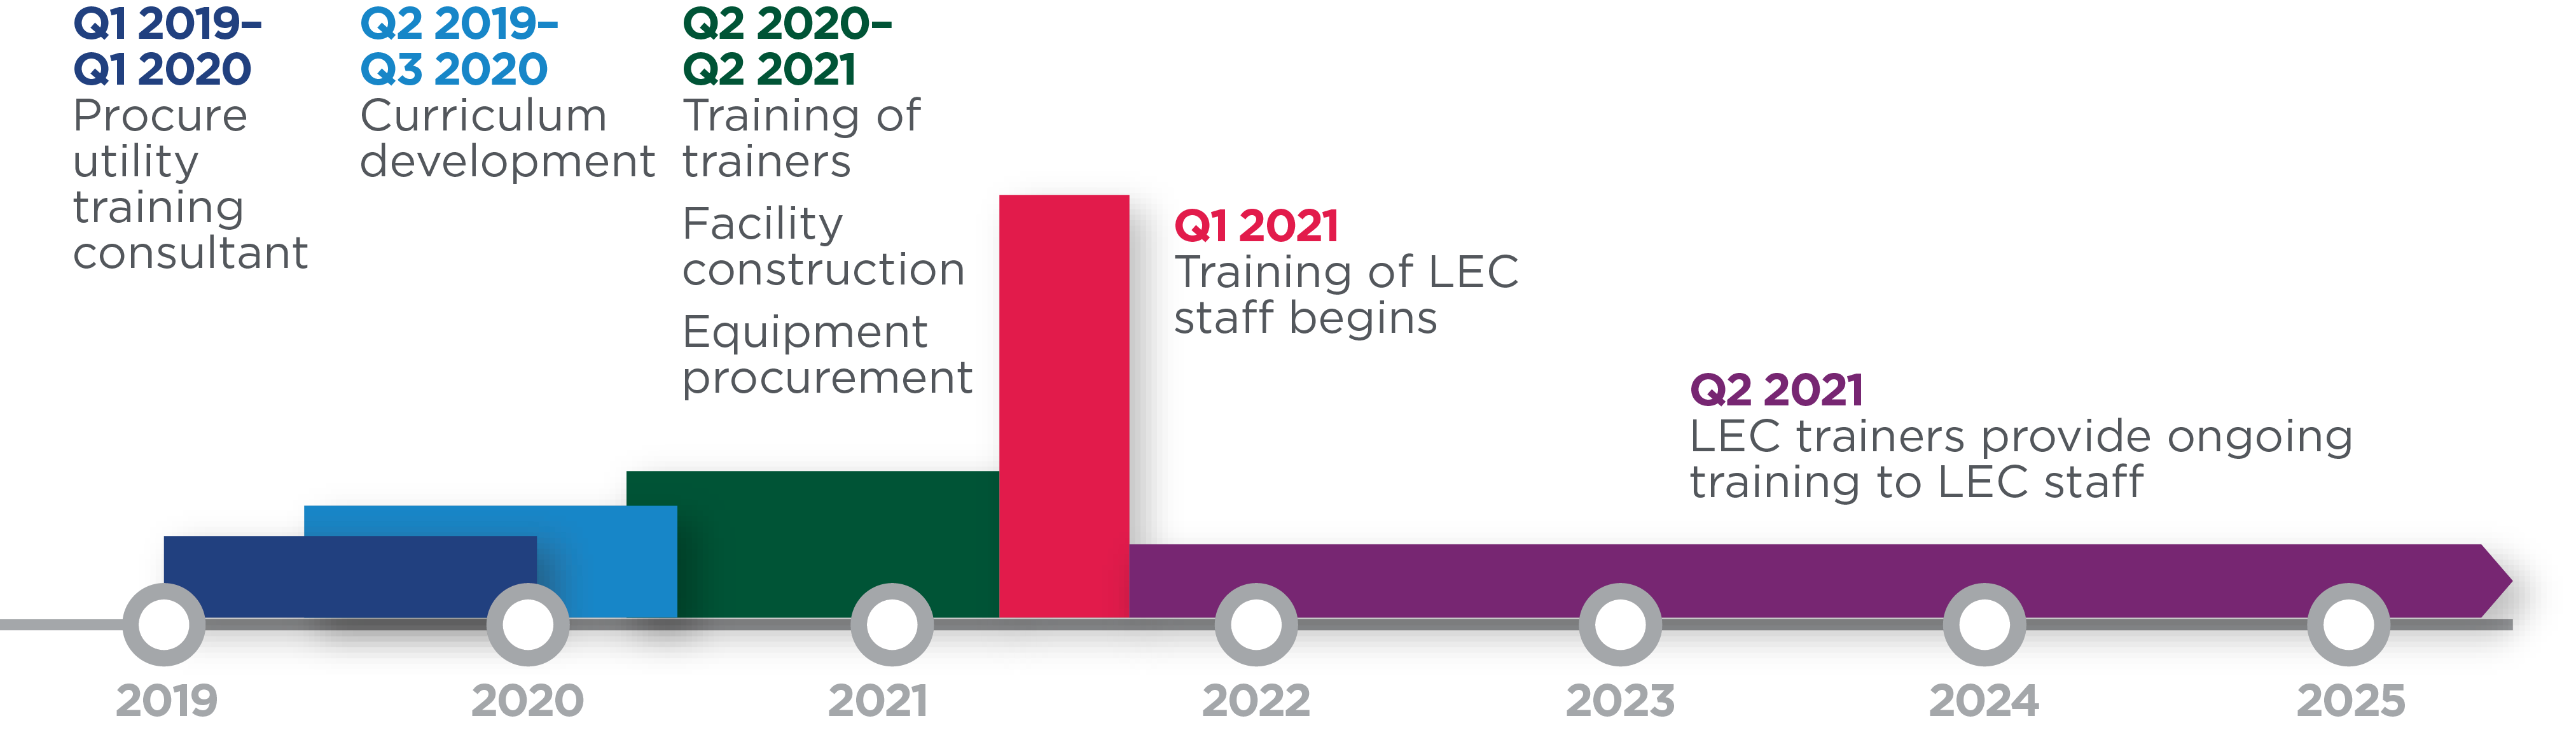 Timeline of implementation. Procuring a utility training consultant occurred between Q1 2019 and Q1 2020. Curriculum development occurred between Q2 2019 and Q3 2020. Training of trainers, facility construction and equipment procurement was between Q2 2020 and Q2 2021. The training of LEC staff started in Q1 2021. The LEC trainers began providing ongoing training to LEC staff in Q2 2021 and continues on.